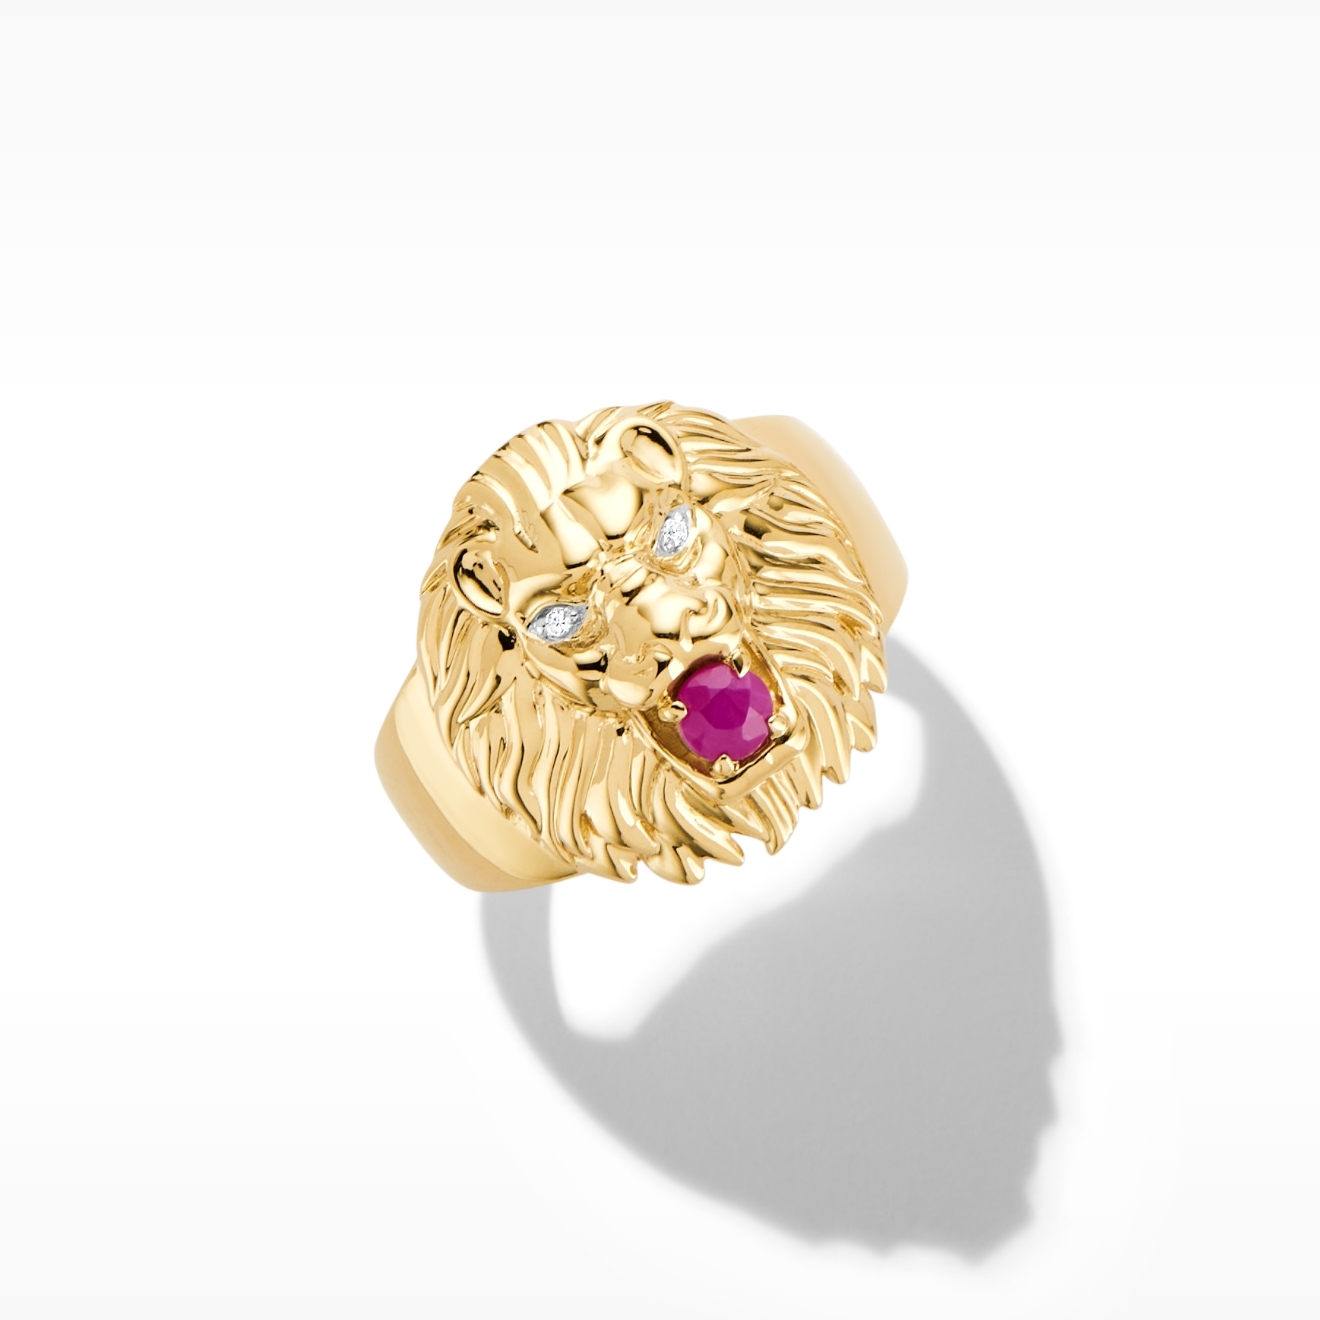 Shop by Category - 10-18K Gold Rings